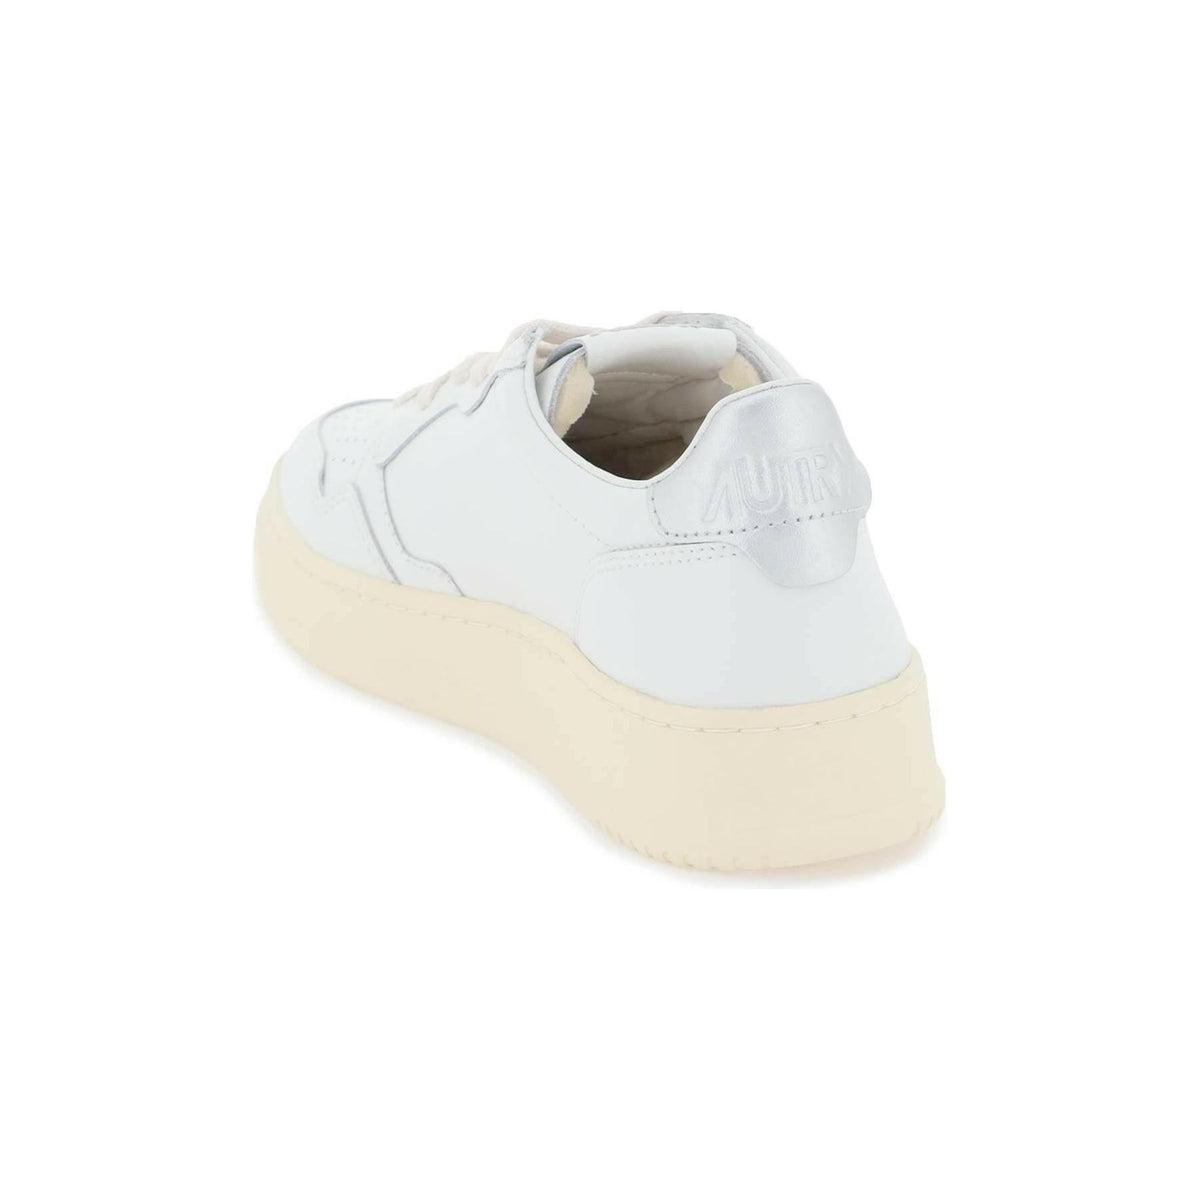 AUTRY - White and Silver Leather Medalist Low Sneakers - JOHN JULIA